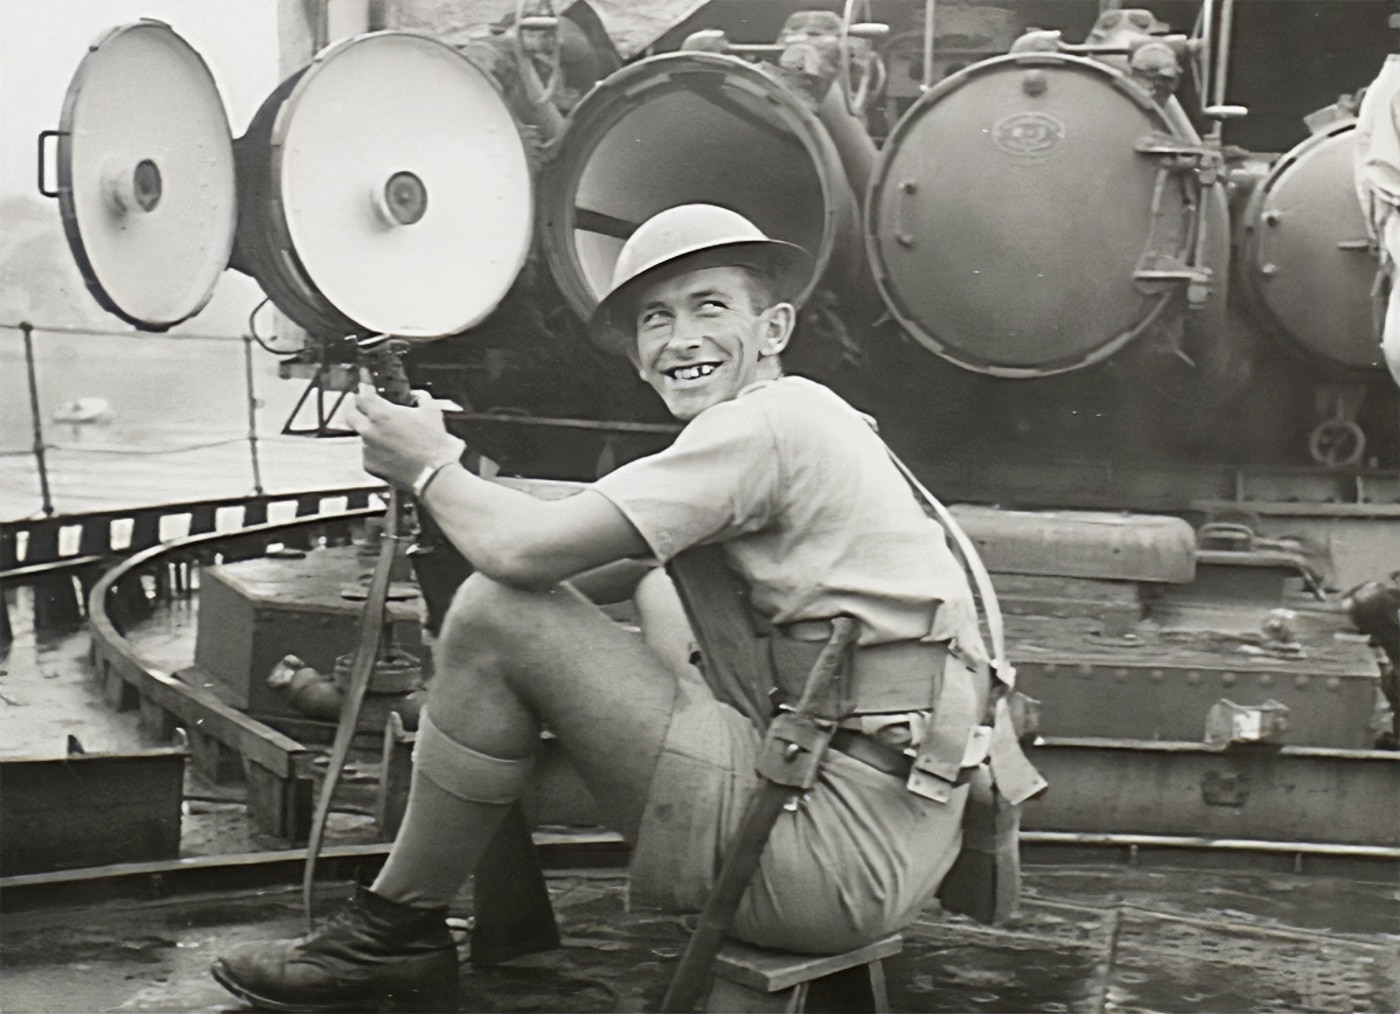 Royal Australian Navy sailor on captured Japanese ship with Lanchester SMG